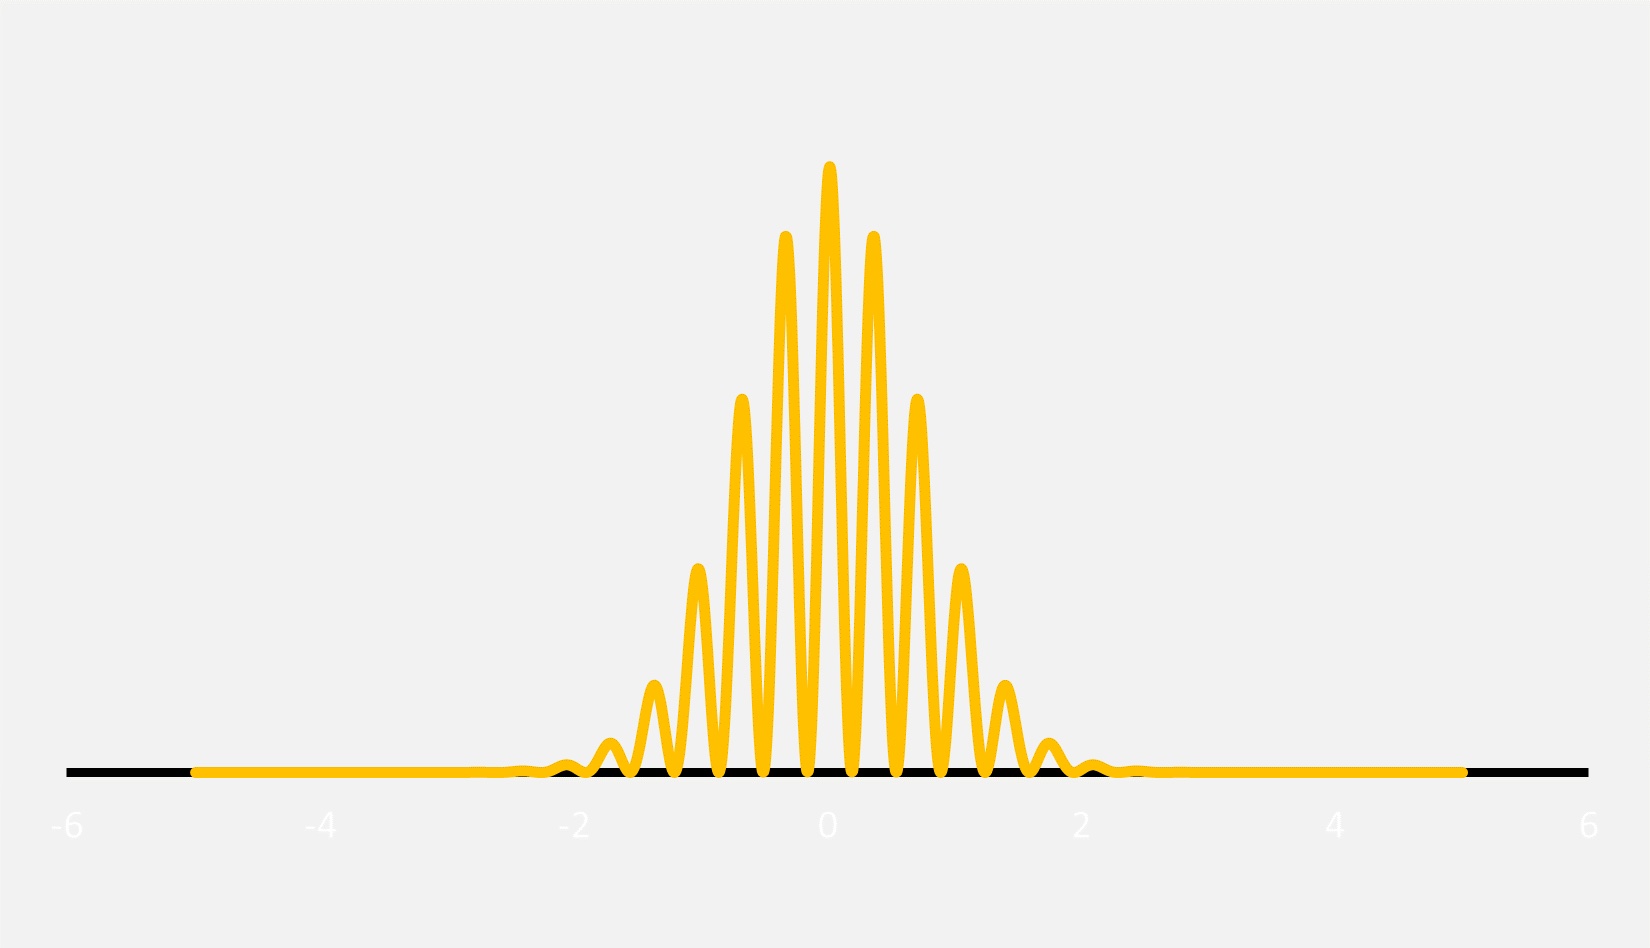 A graph with a yellow line and a yellow line.